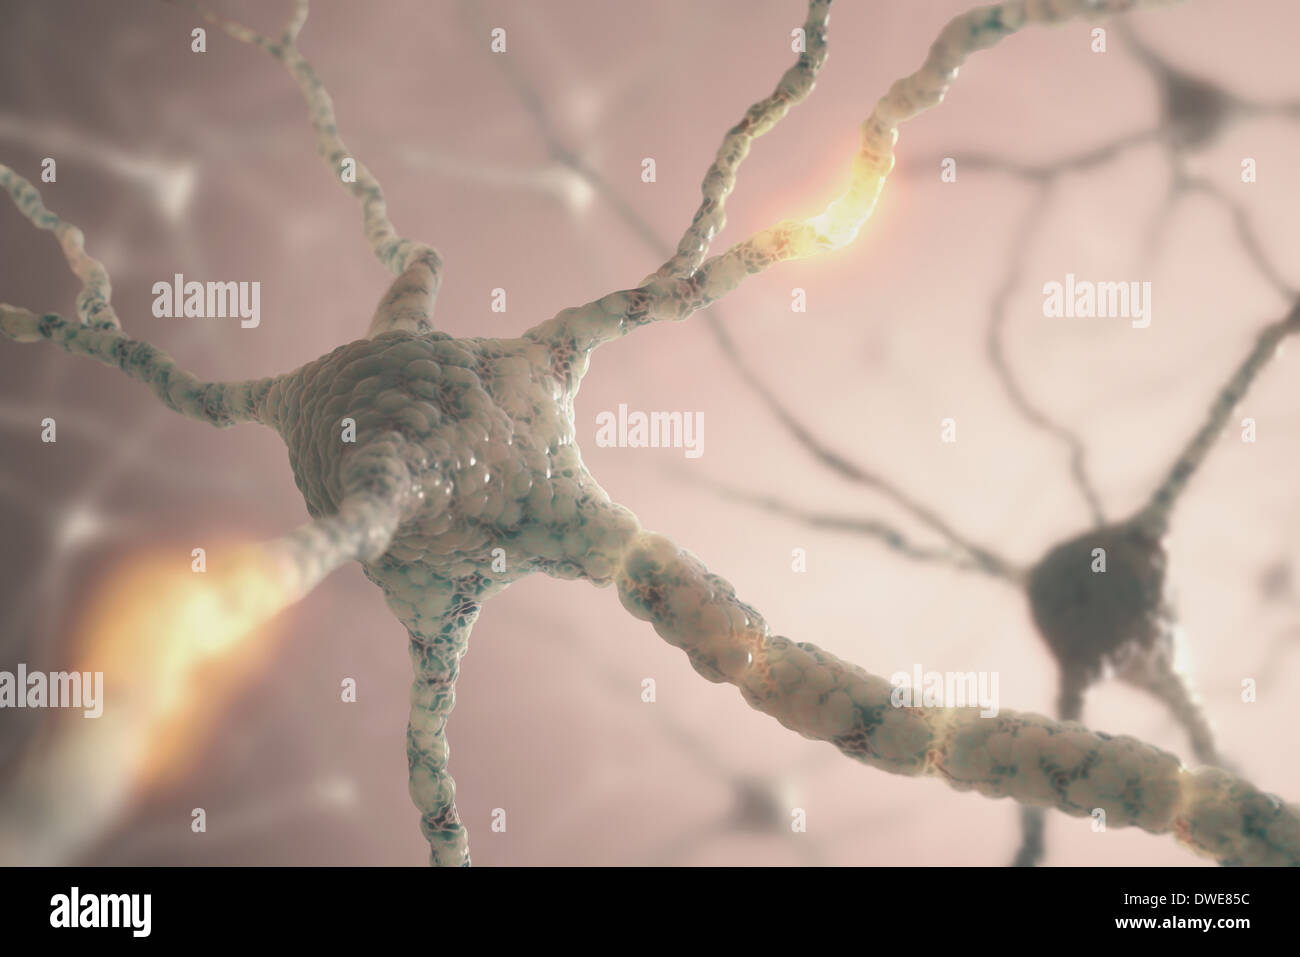 Image concept of neurons from the human brain. Stock Photo